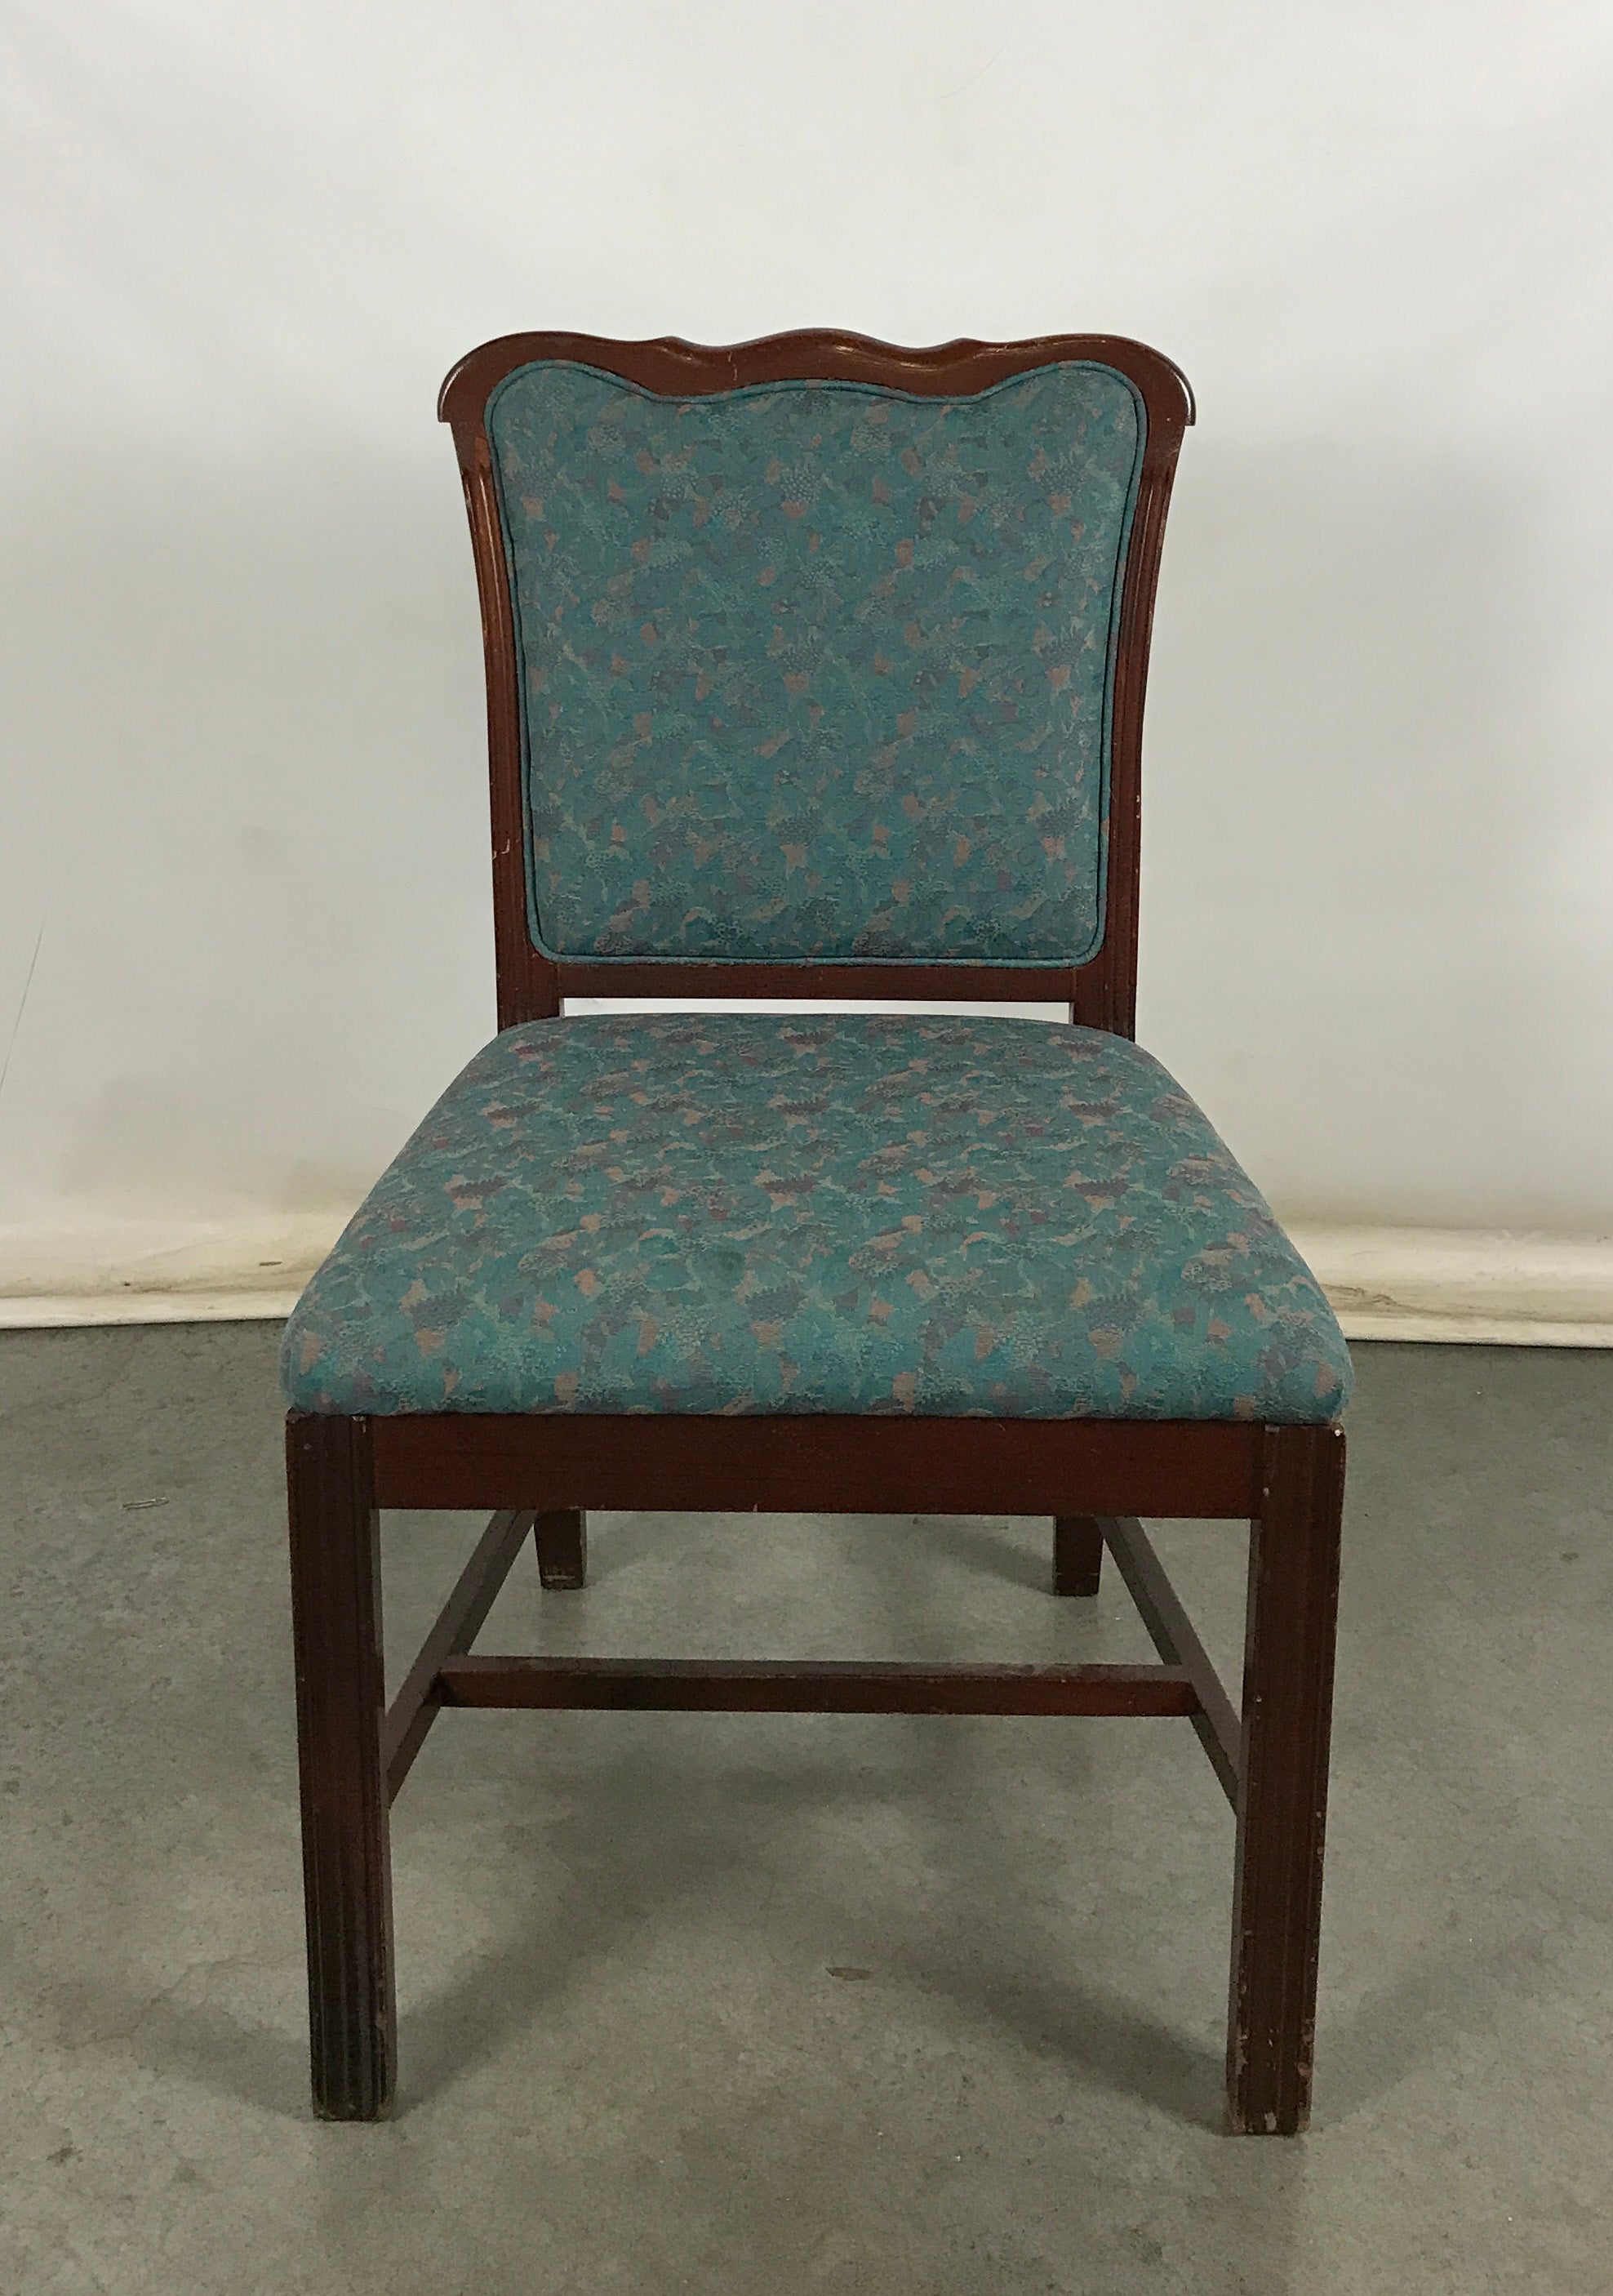 St. Timothy Chair Co. Green Upholstered Wooden Chair